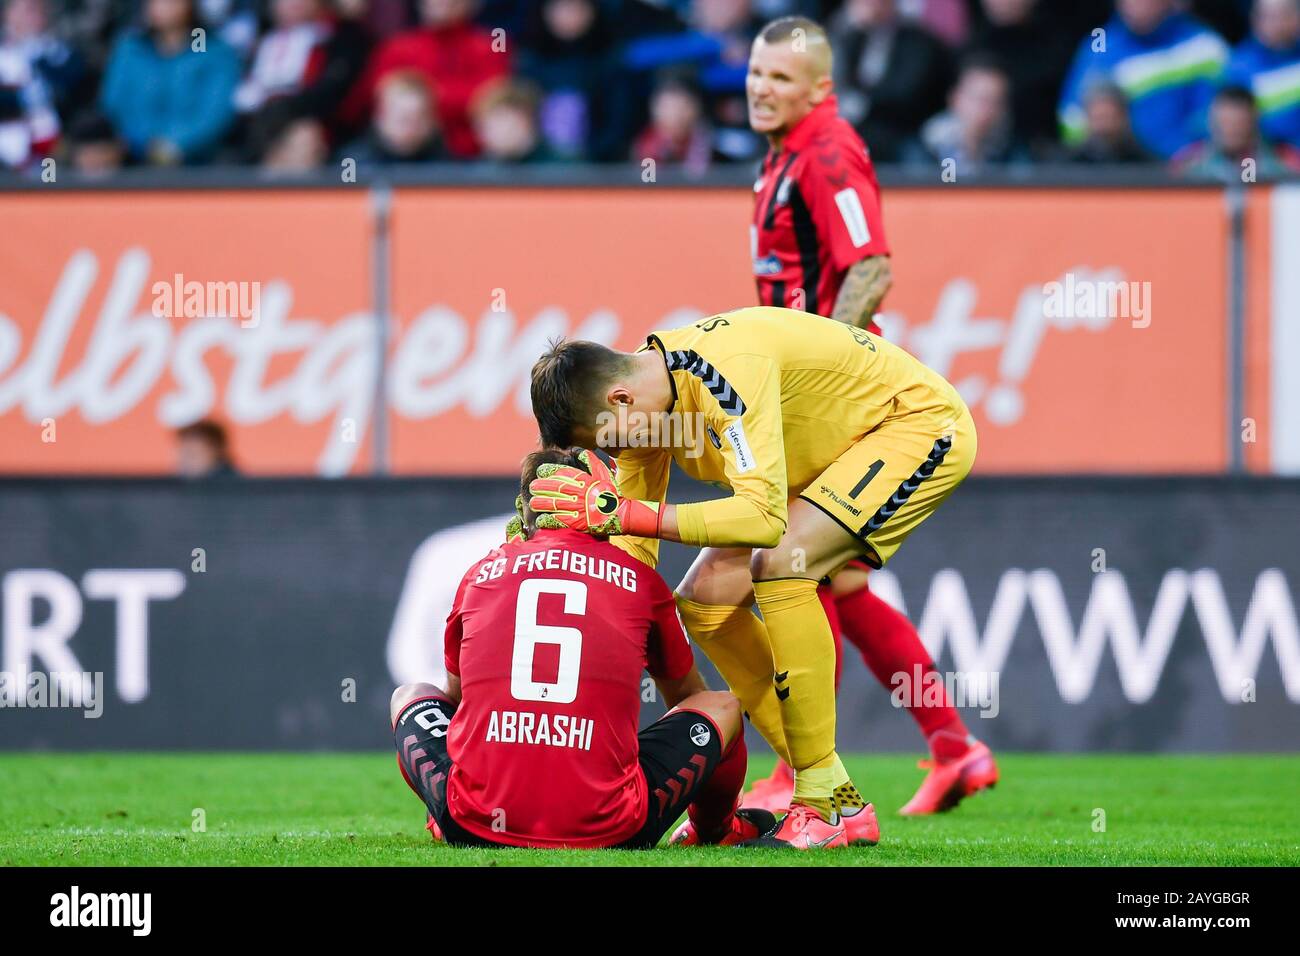 Duesseldorf, Germany. Paderborn, Deutschland. 15th Feb, 2020. Augsburg, Germany. 15th Feb, 2020. Football: Bundesliga, 22nd matchday, FC Augsburg - SC Freiburg, WWK Arena. Freiburg's Amir Abrashi (l) and Freiburg's goalkeeper Alexander Schwolow (r) react after the game. In the background is Freiburg's Jonathan Schmid Credit: Tom Weller/dpa - IMPORTANT NOTE: In accordance with the regulations of the DFL Deutsche Fußball Liga and the DFB Deutscher Fußball-Bund, it is prohibited to exploit or have exploited in the stadium and/or from the game taken photographs in the form of sequence images and/o Stock Photo